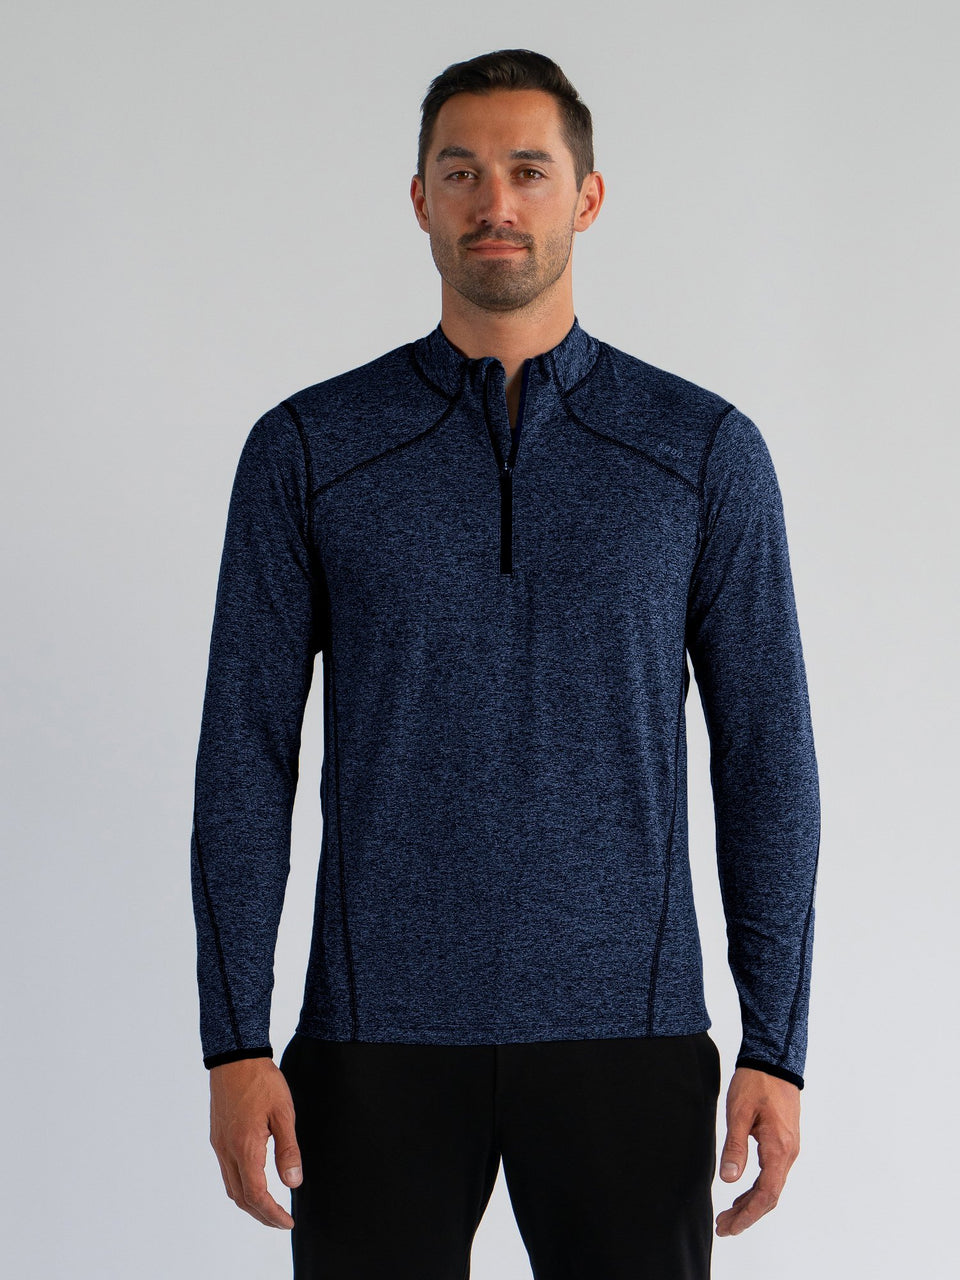 Elevate 1/4 Zip - Navy Black - Large - SODO Apparel - Limited Inventory